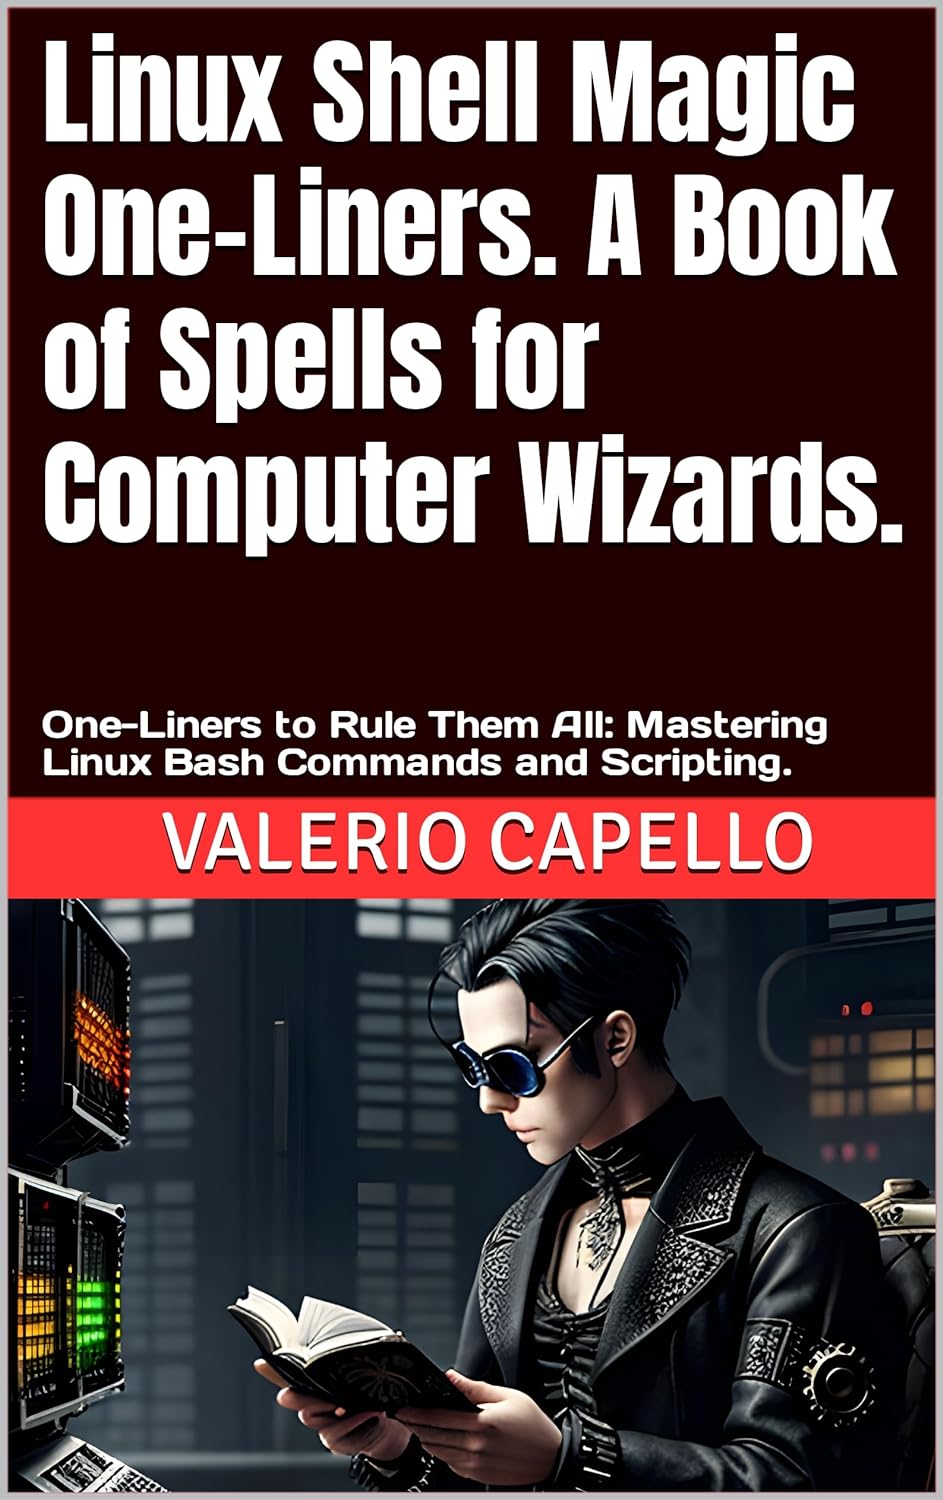 Linux Shell Magic One-Liners. A Book of Spells for Computer Wizards. One-Liners to Rule Them All: Mastering Linux Bash Commands and Scripting